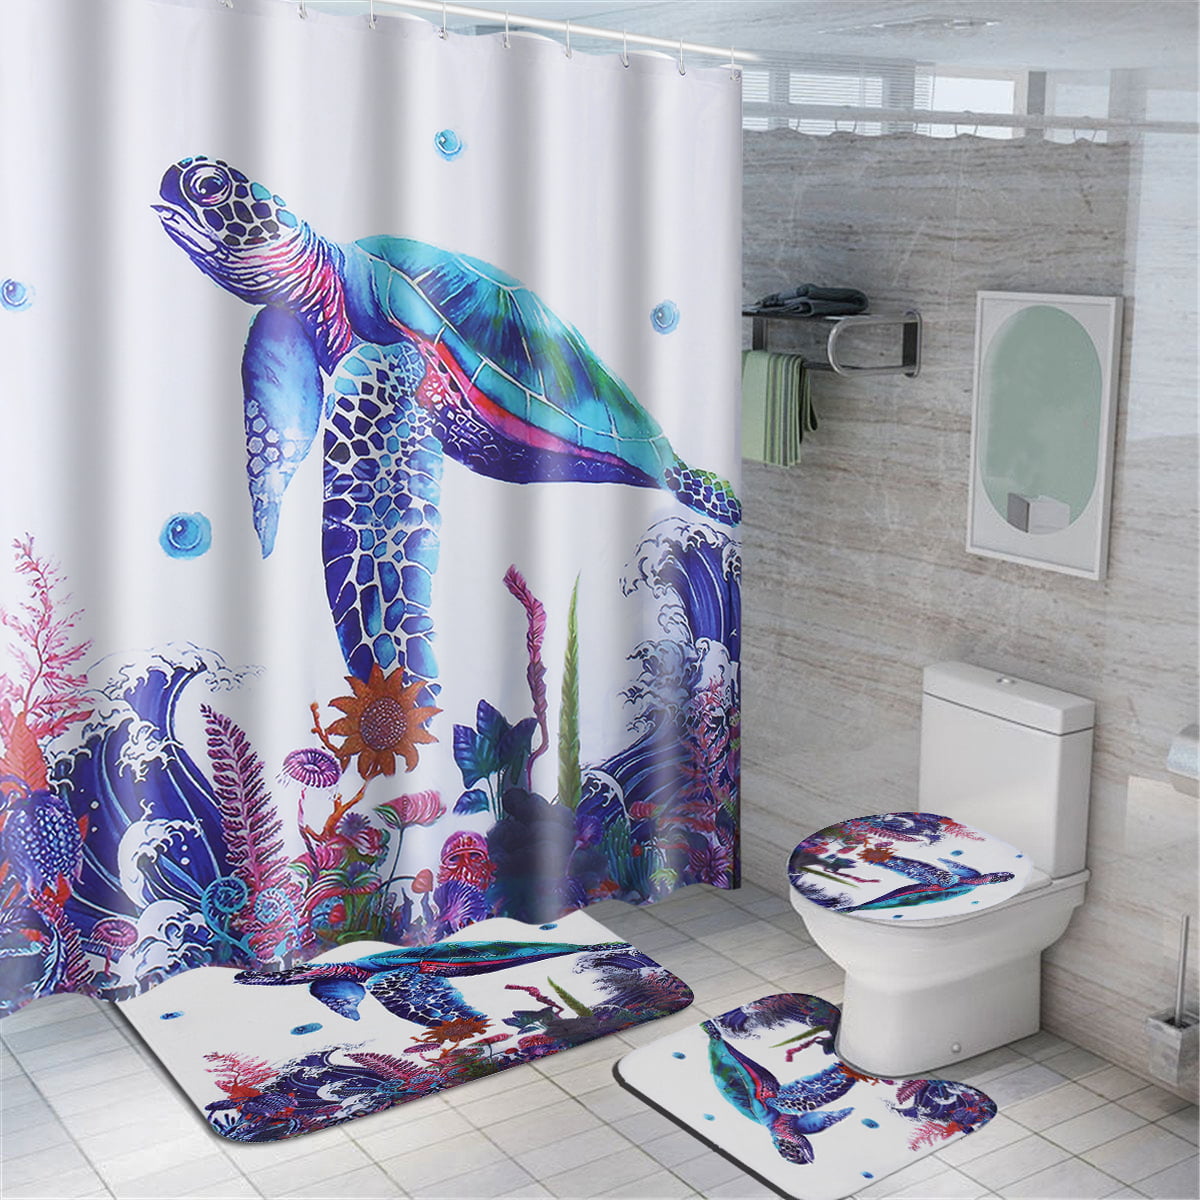 Details about   Frog on Wheat Animal Bathroom Waterproof Fabric Shower Curtain Bath Mat 12 Hooks